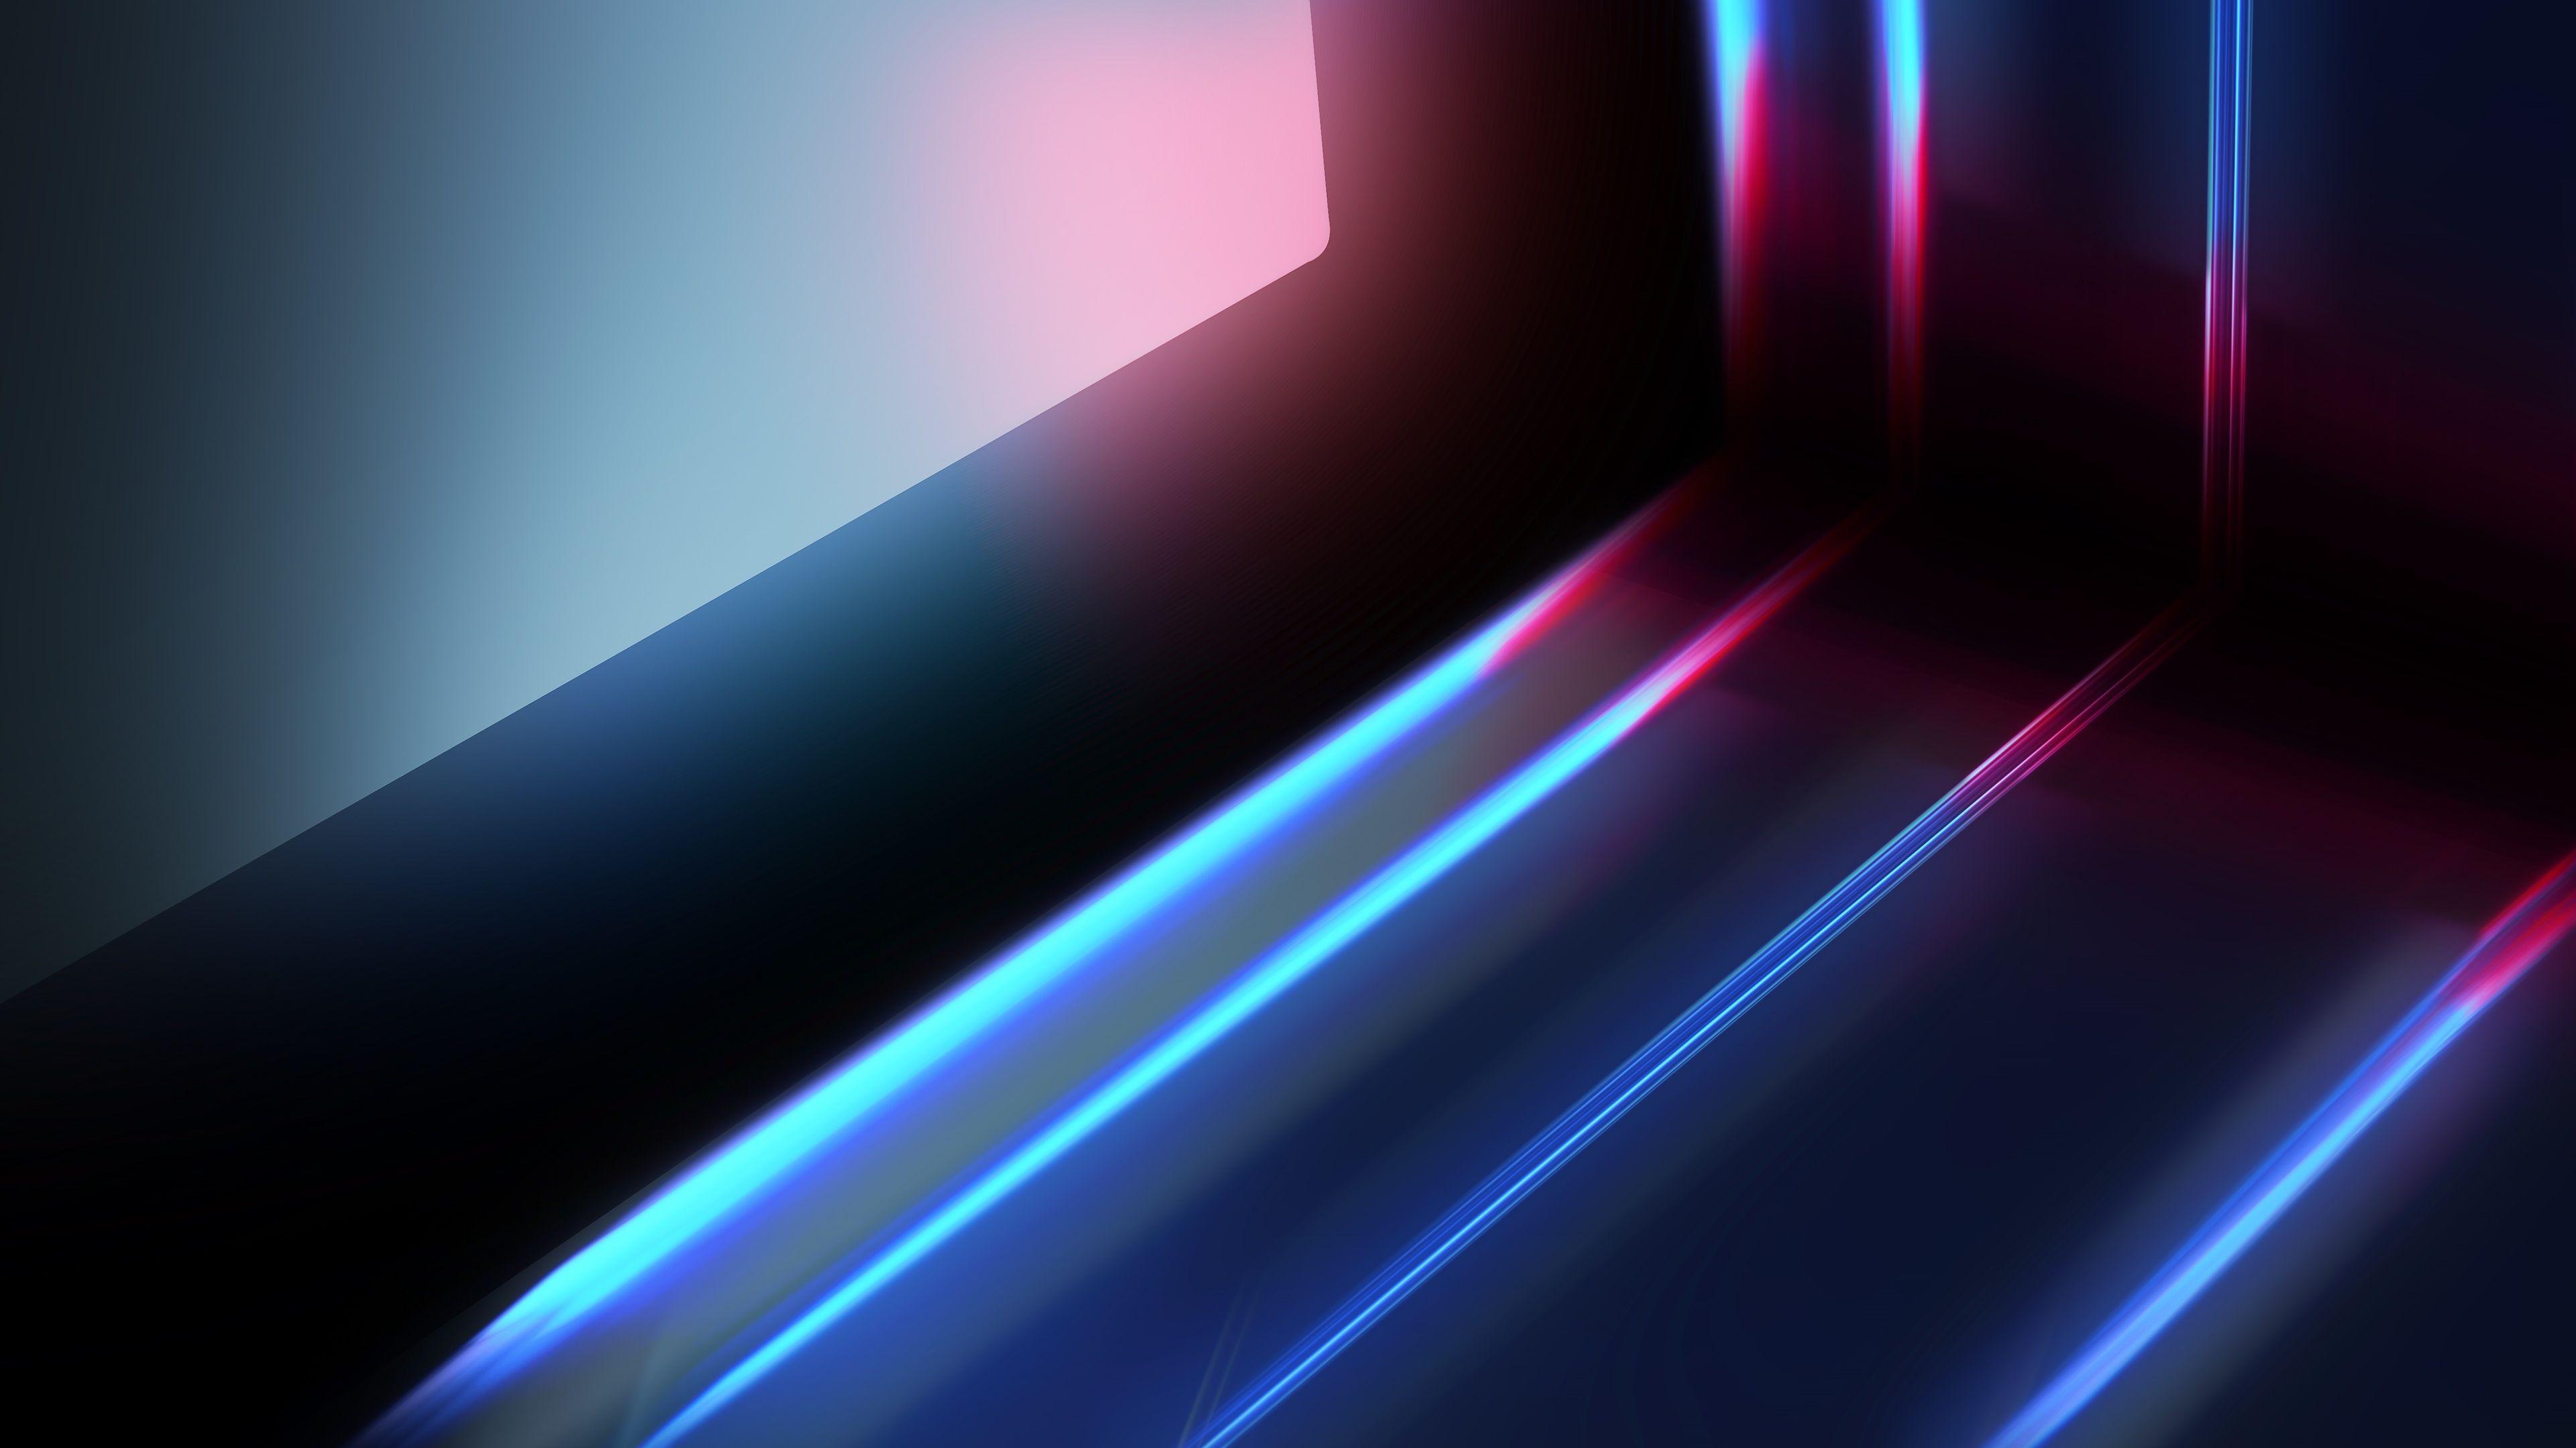 Cool Synth Lines Abstract 4k HD Wallpaper Digital Art